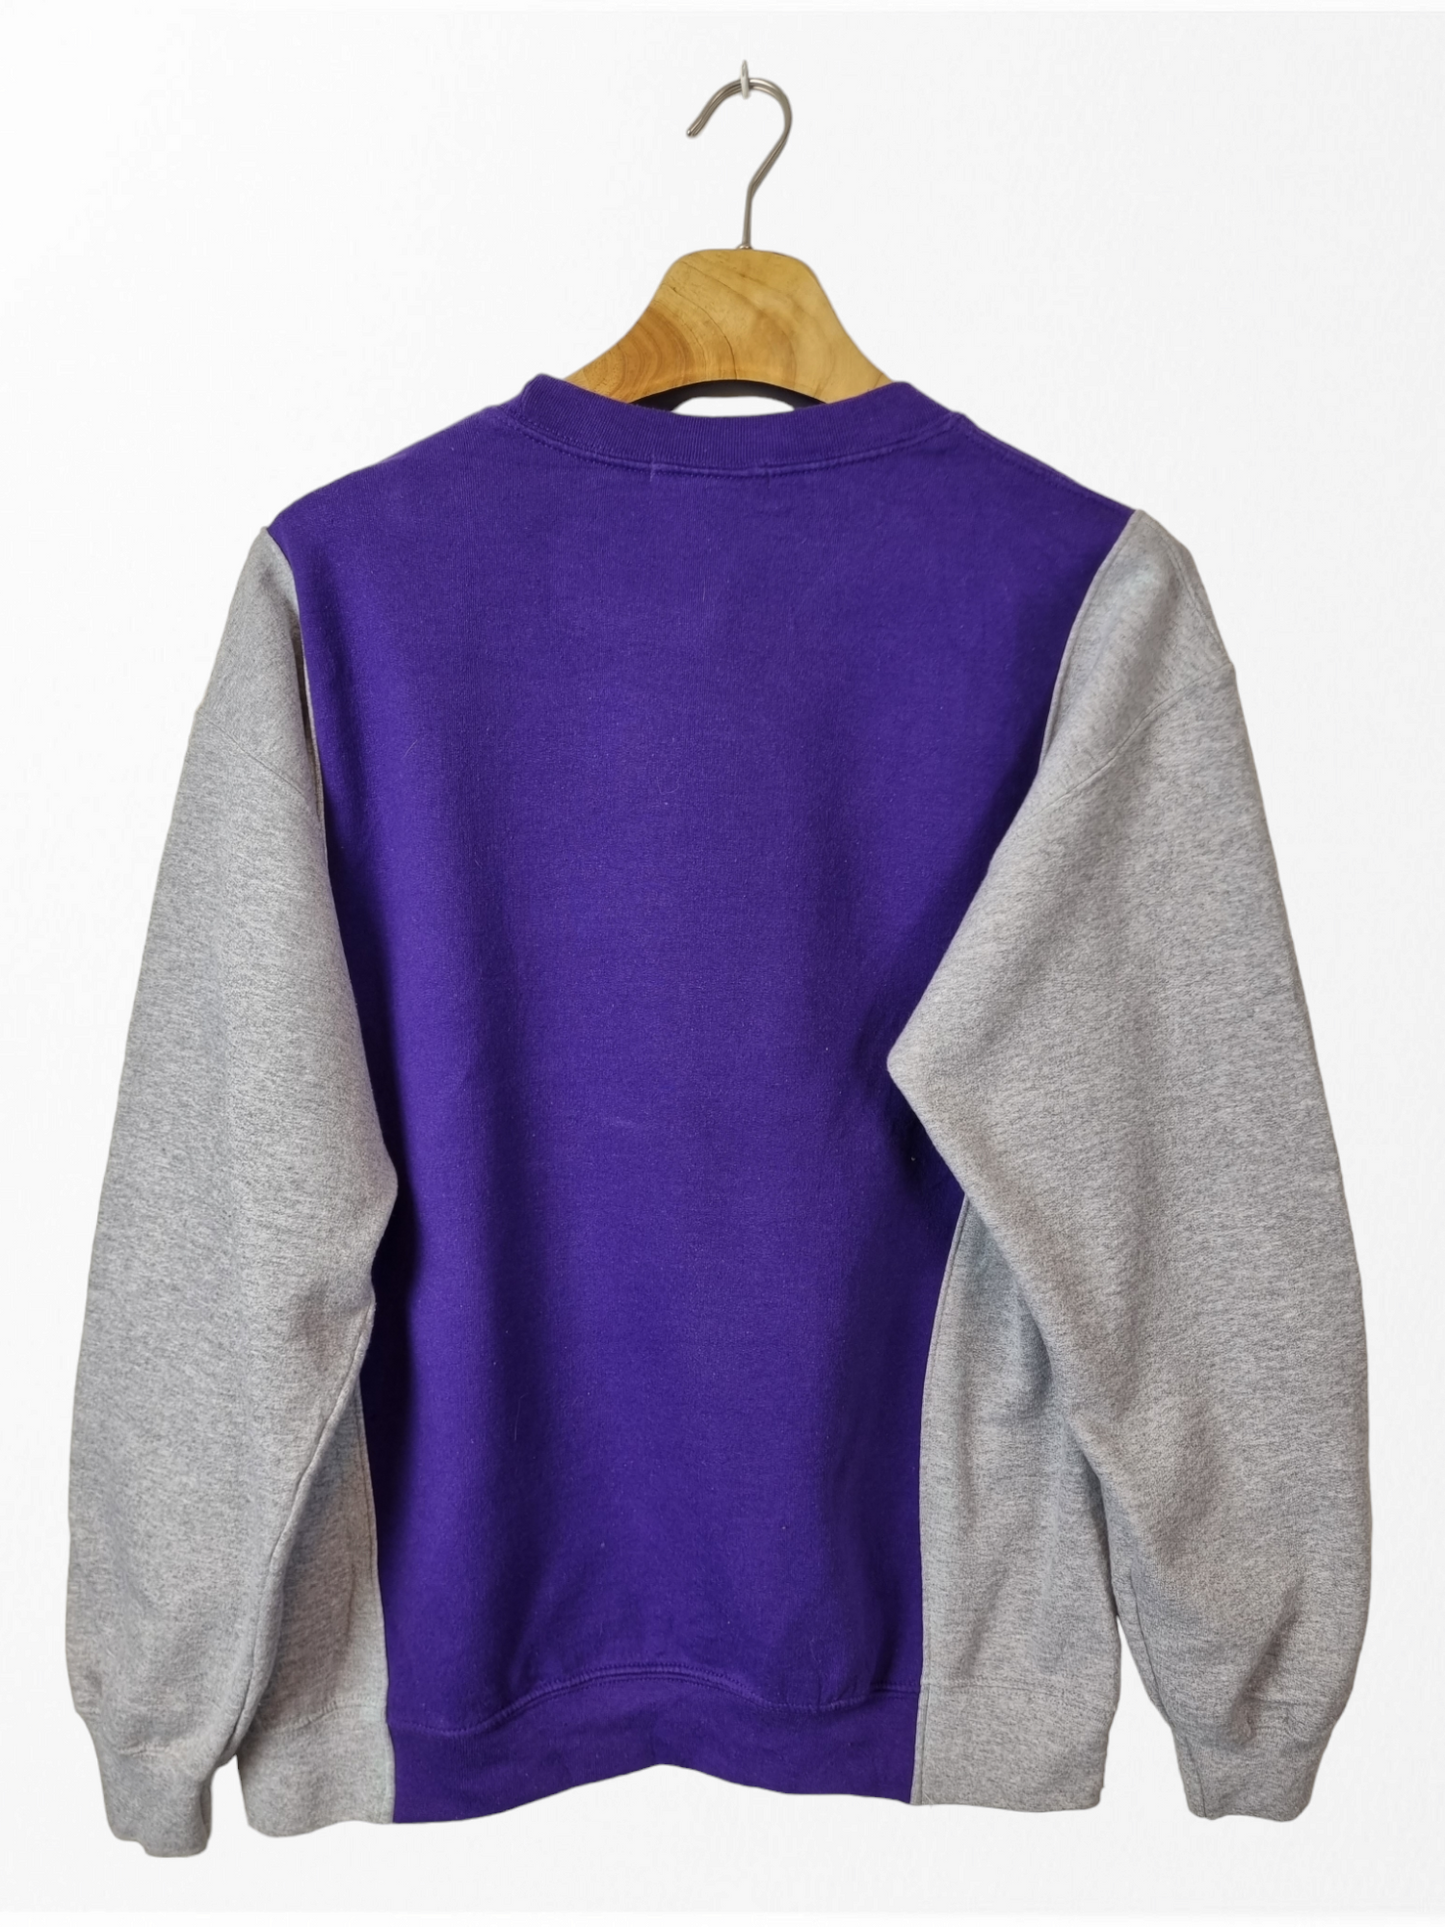 Nike spell out sweater mat M